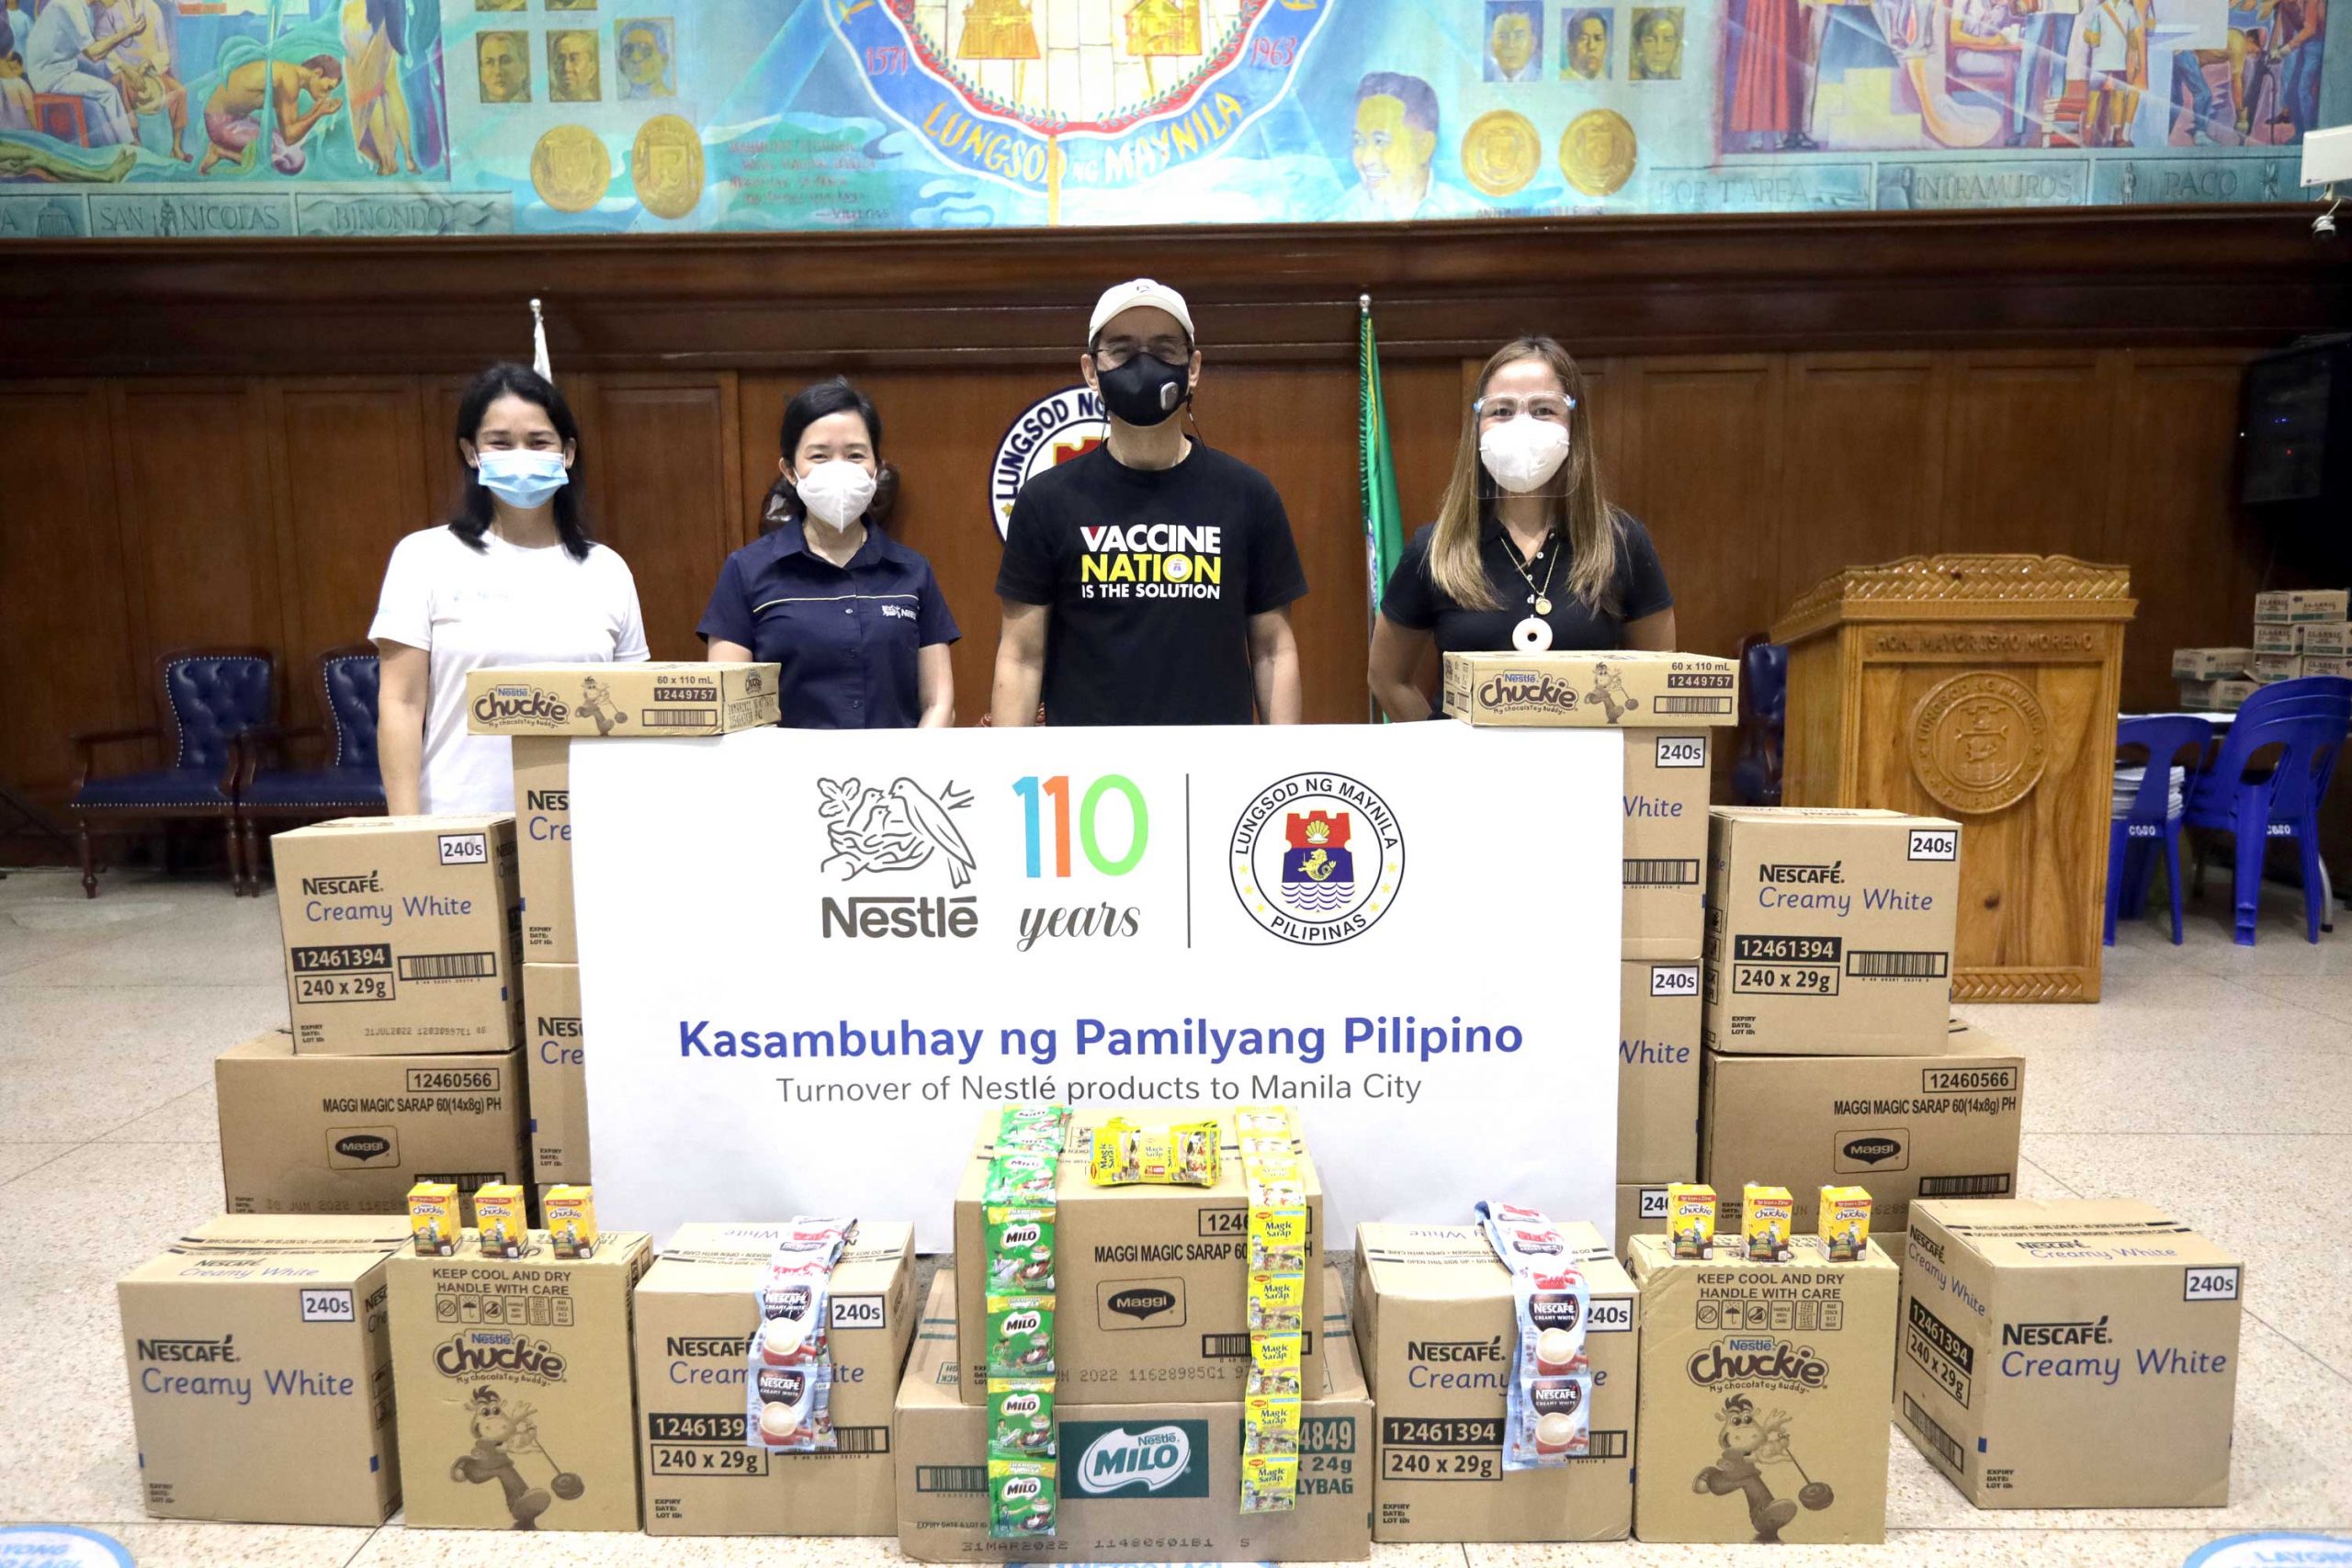 Nestlé Philippines, one of the country’s top corporations and a leading Nestlé market worldwide, marked its 110thyear by committing to intensify its programs as a Kasambuhay for Good. As a highlight of its 110th year, Nestlé is distributing P110 million worth of its products to families in 110 cities, municipalities and provinces across the Philippines with the help of partners including local government units and the Philippine Red Cross. Shown in photo is Mayor Isko Moreno during the turnover ceremony in Manila City led by Ms. Arlene Tan-Bantoto, Senior Vice President and Head of Public Affairs, Communications and Sustainability of Nestlé Philippines (second from left).